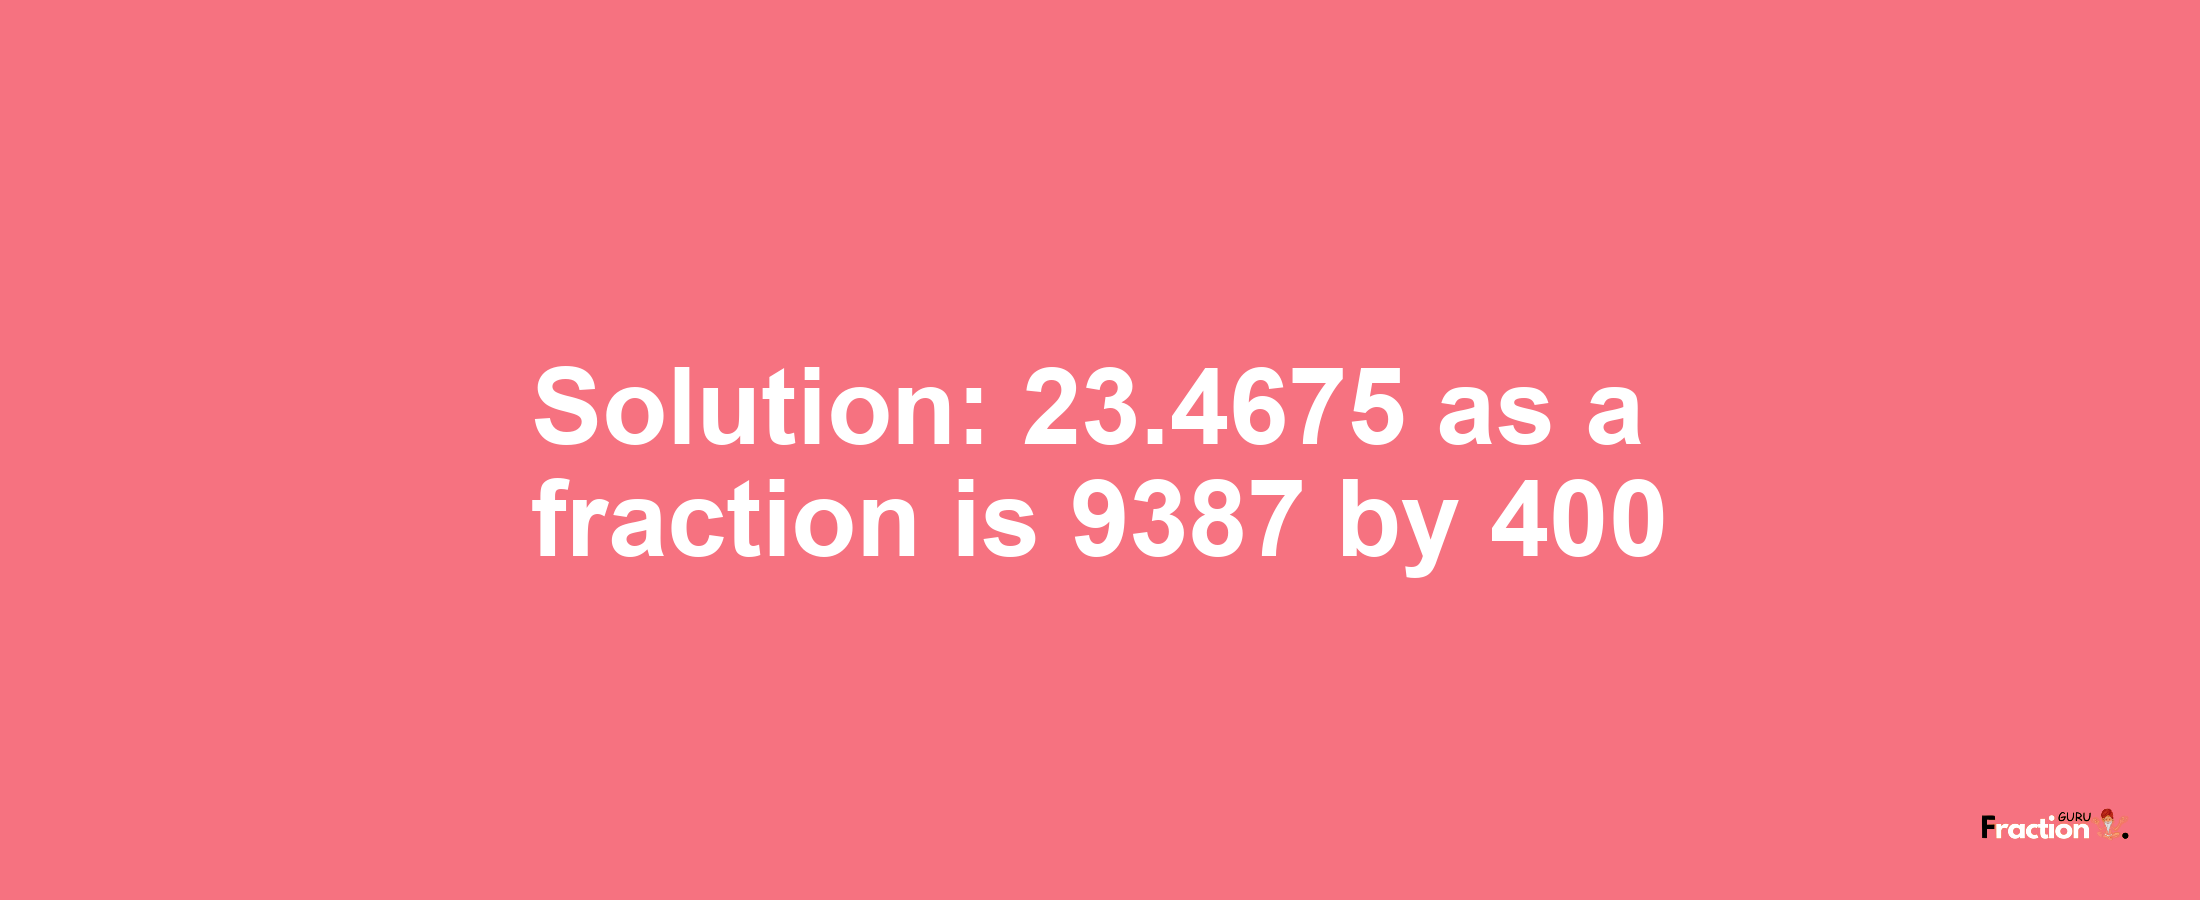 Solution:23.4675 as a fraction is 9387/400